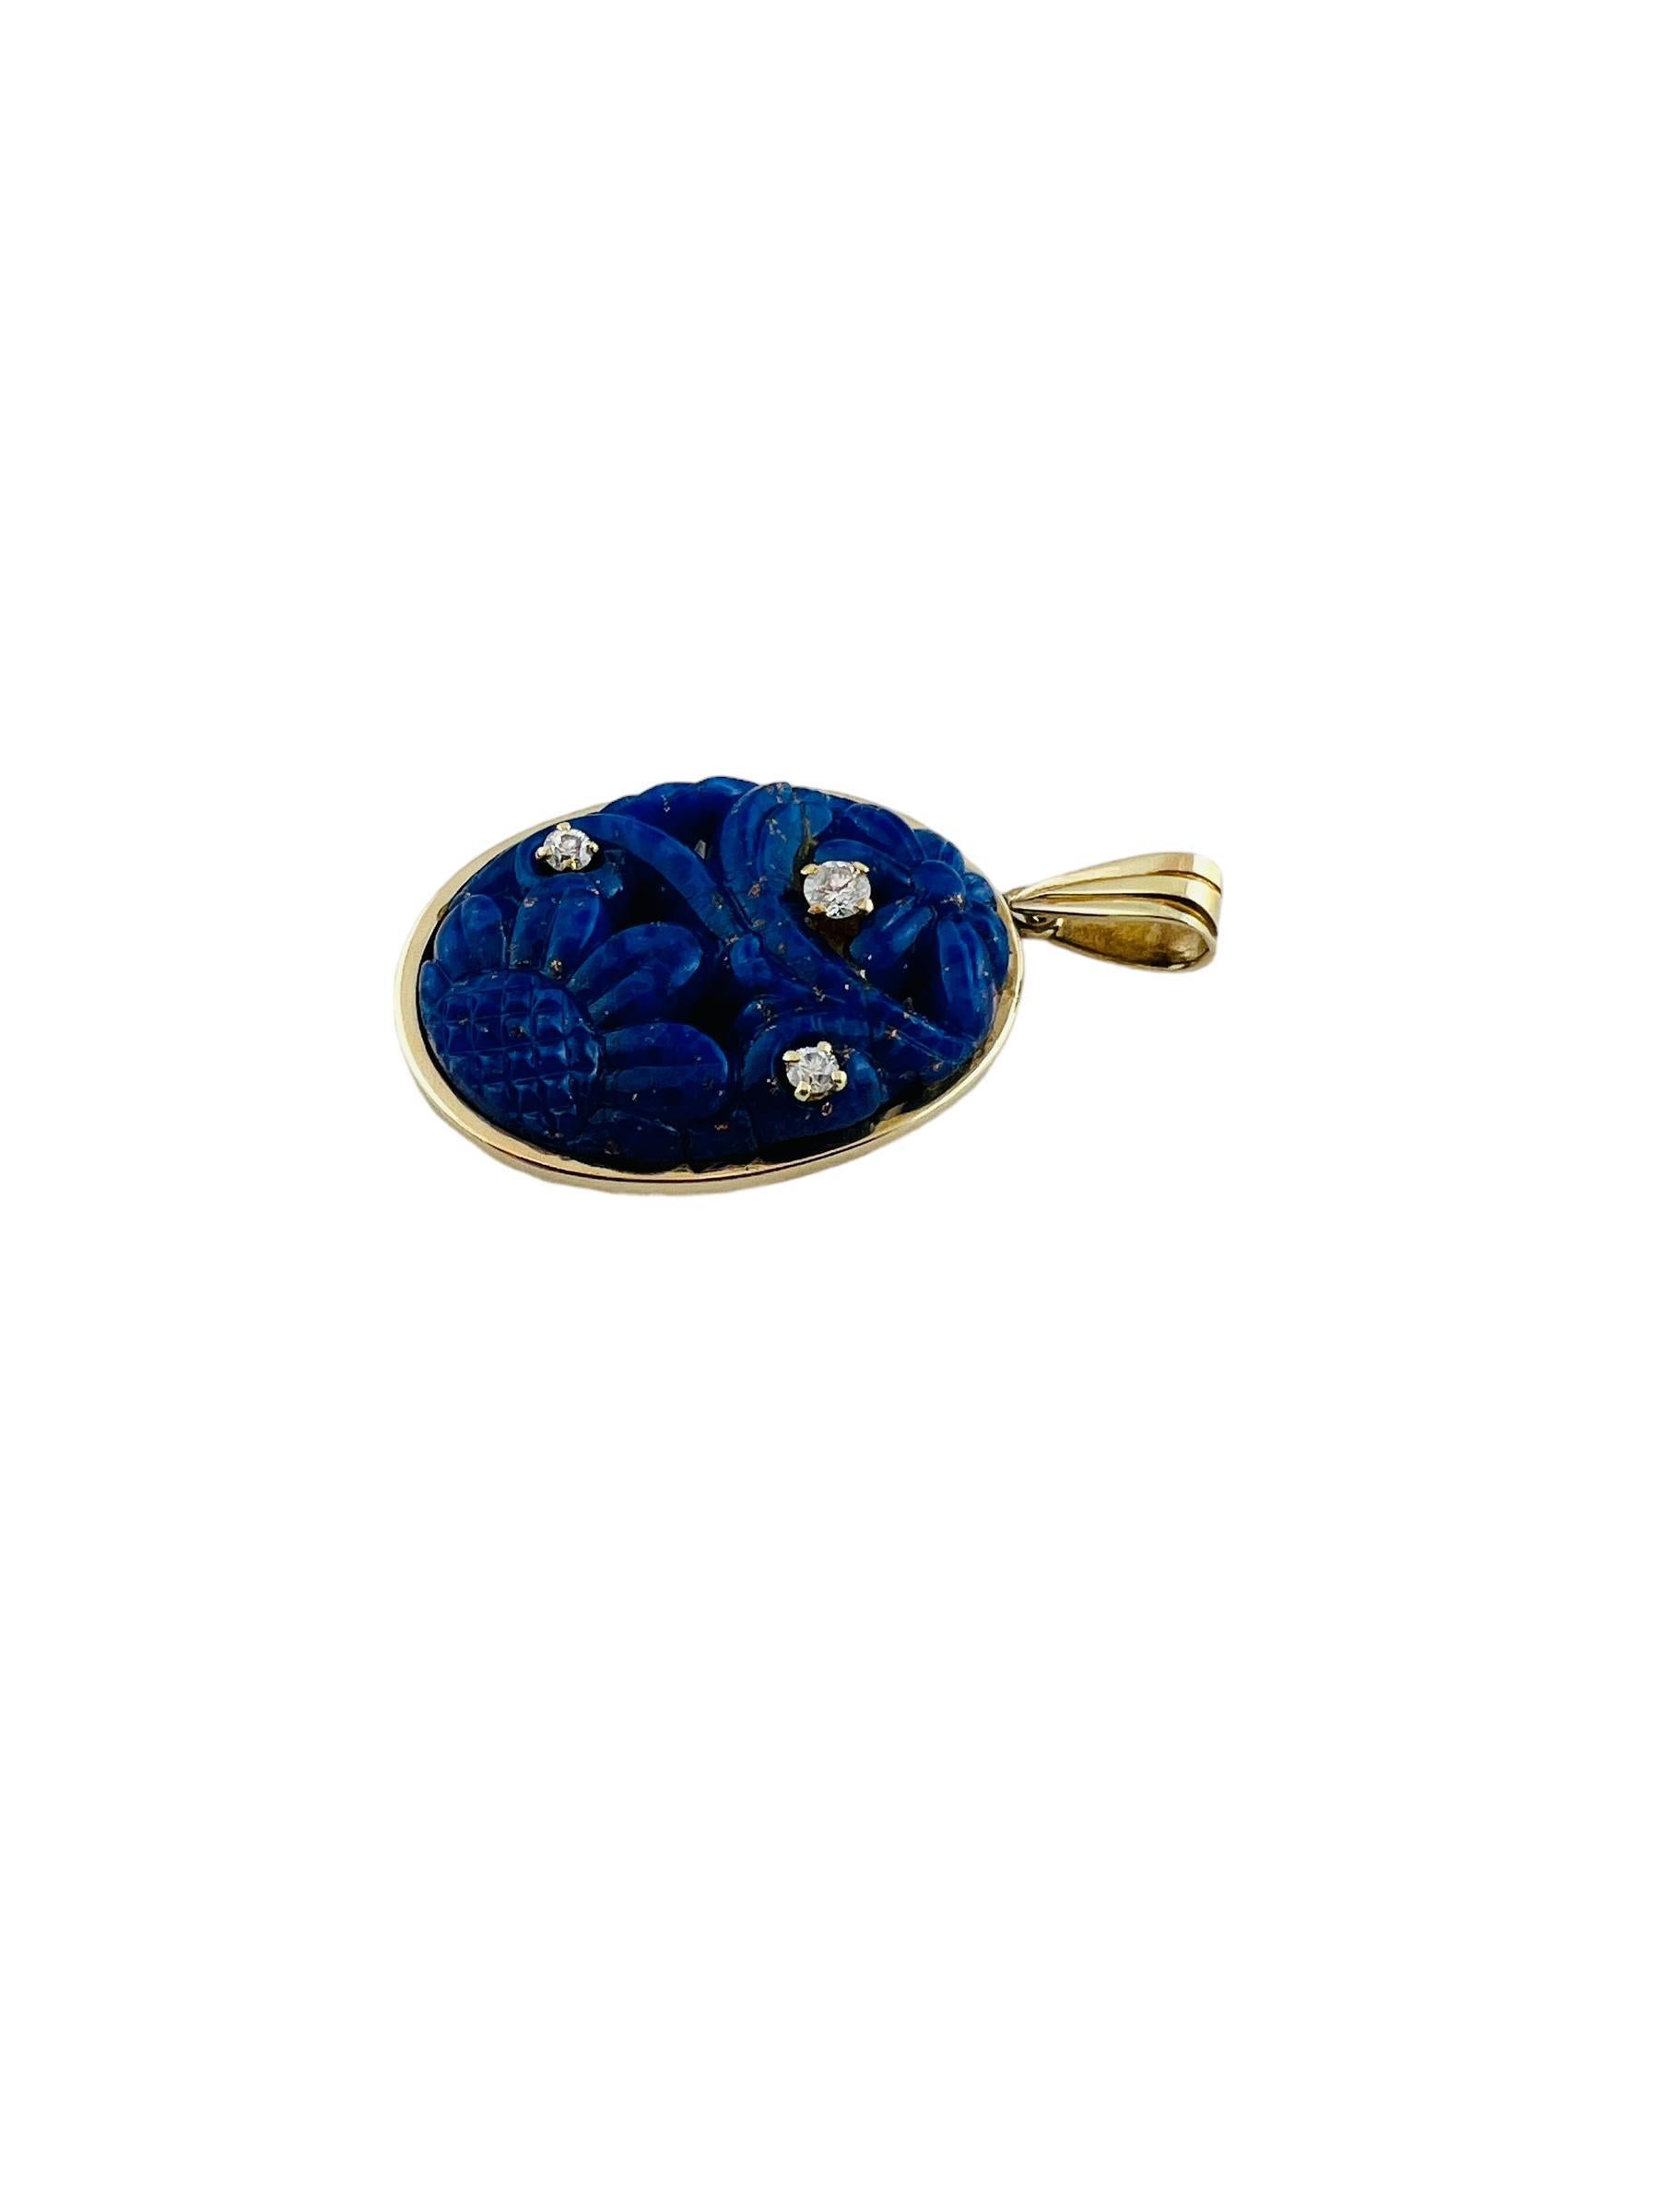 Oval Cut Antique 14K Yellow Gold Carved Lapis Lazuli and Diamond Pendant #15999 For Sale